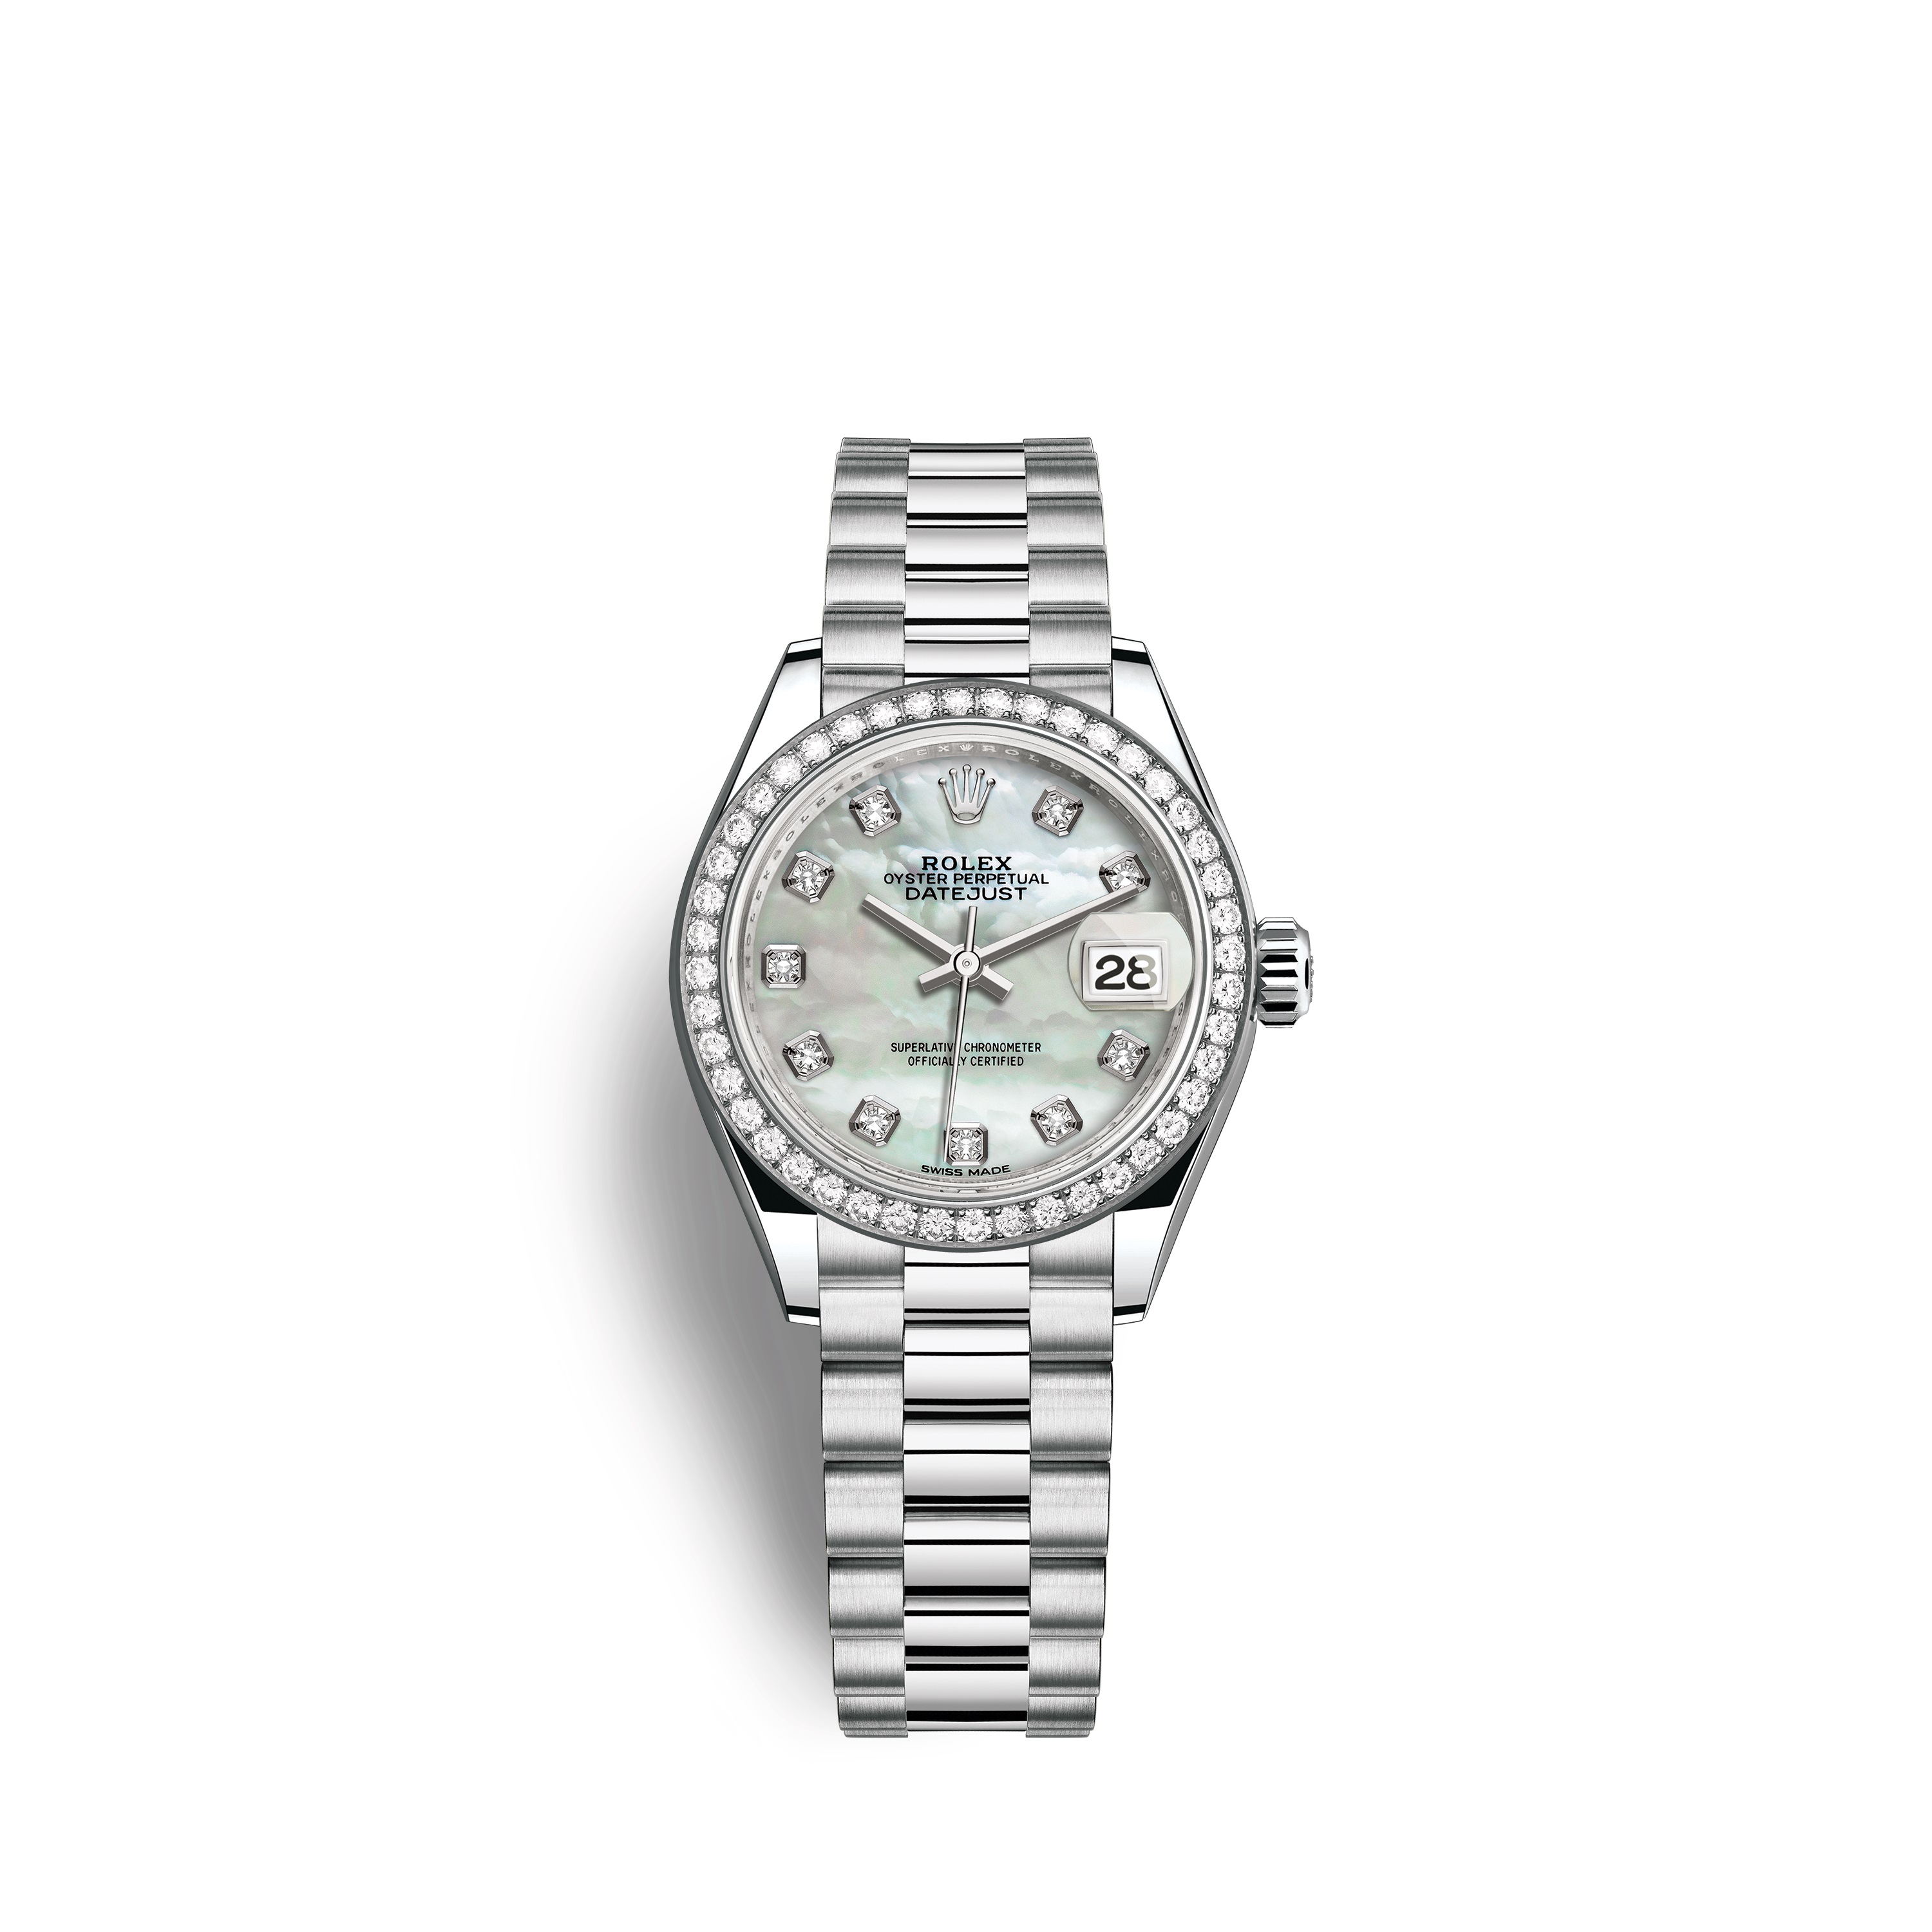 Lady-Datejust 28 279136RBR Platinum & Diamonds Watch (White Mother-of-Pearl Set with Diamonds)